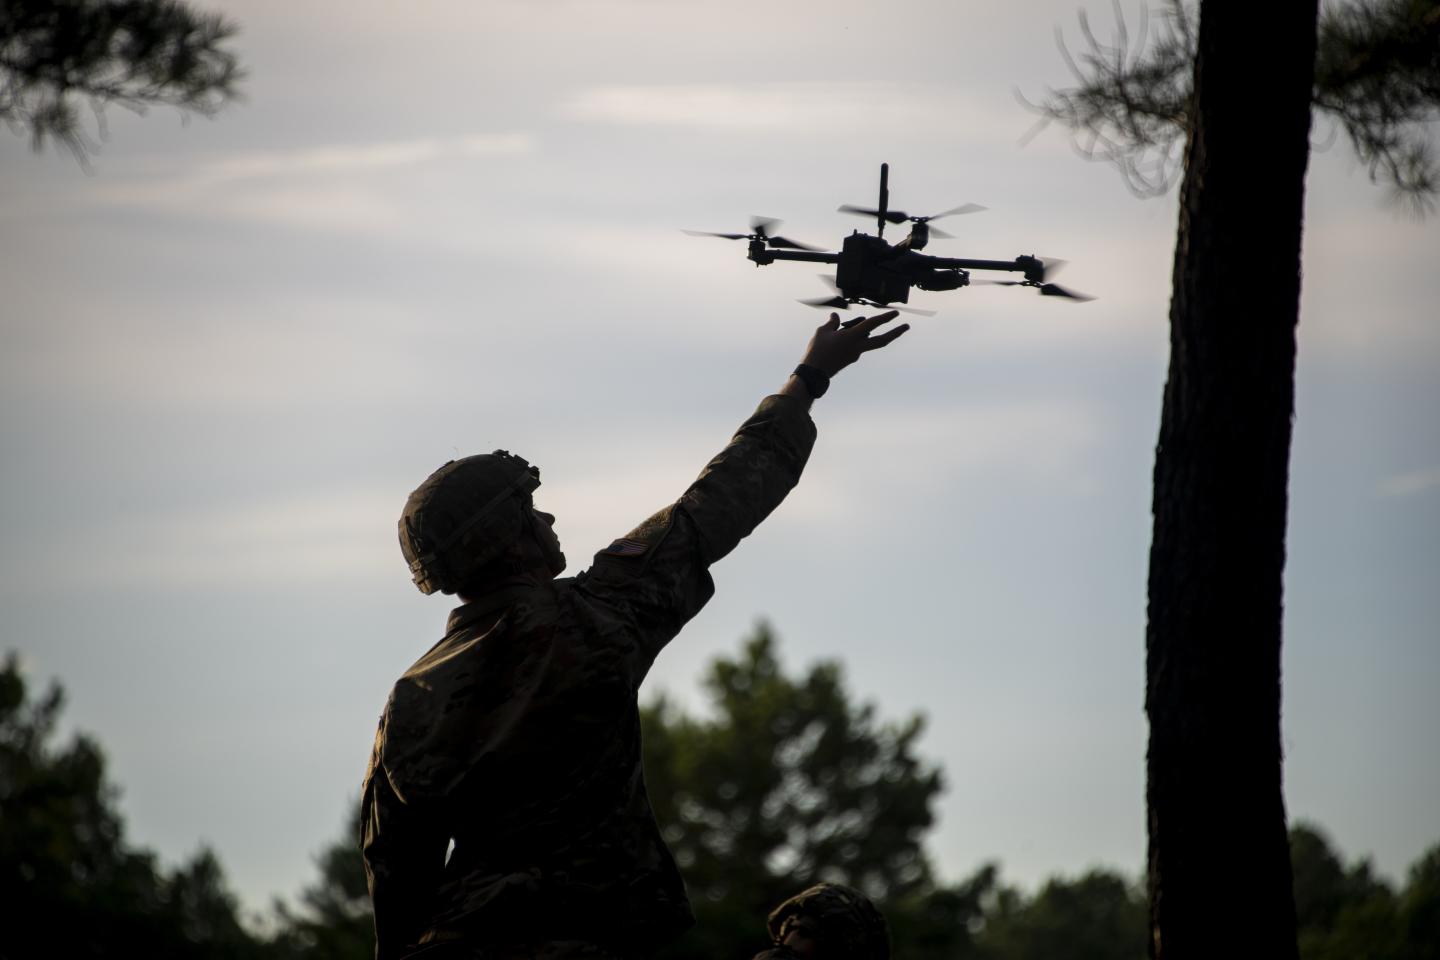 Soldier hand-launches drone